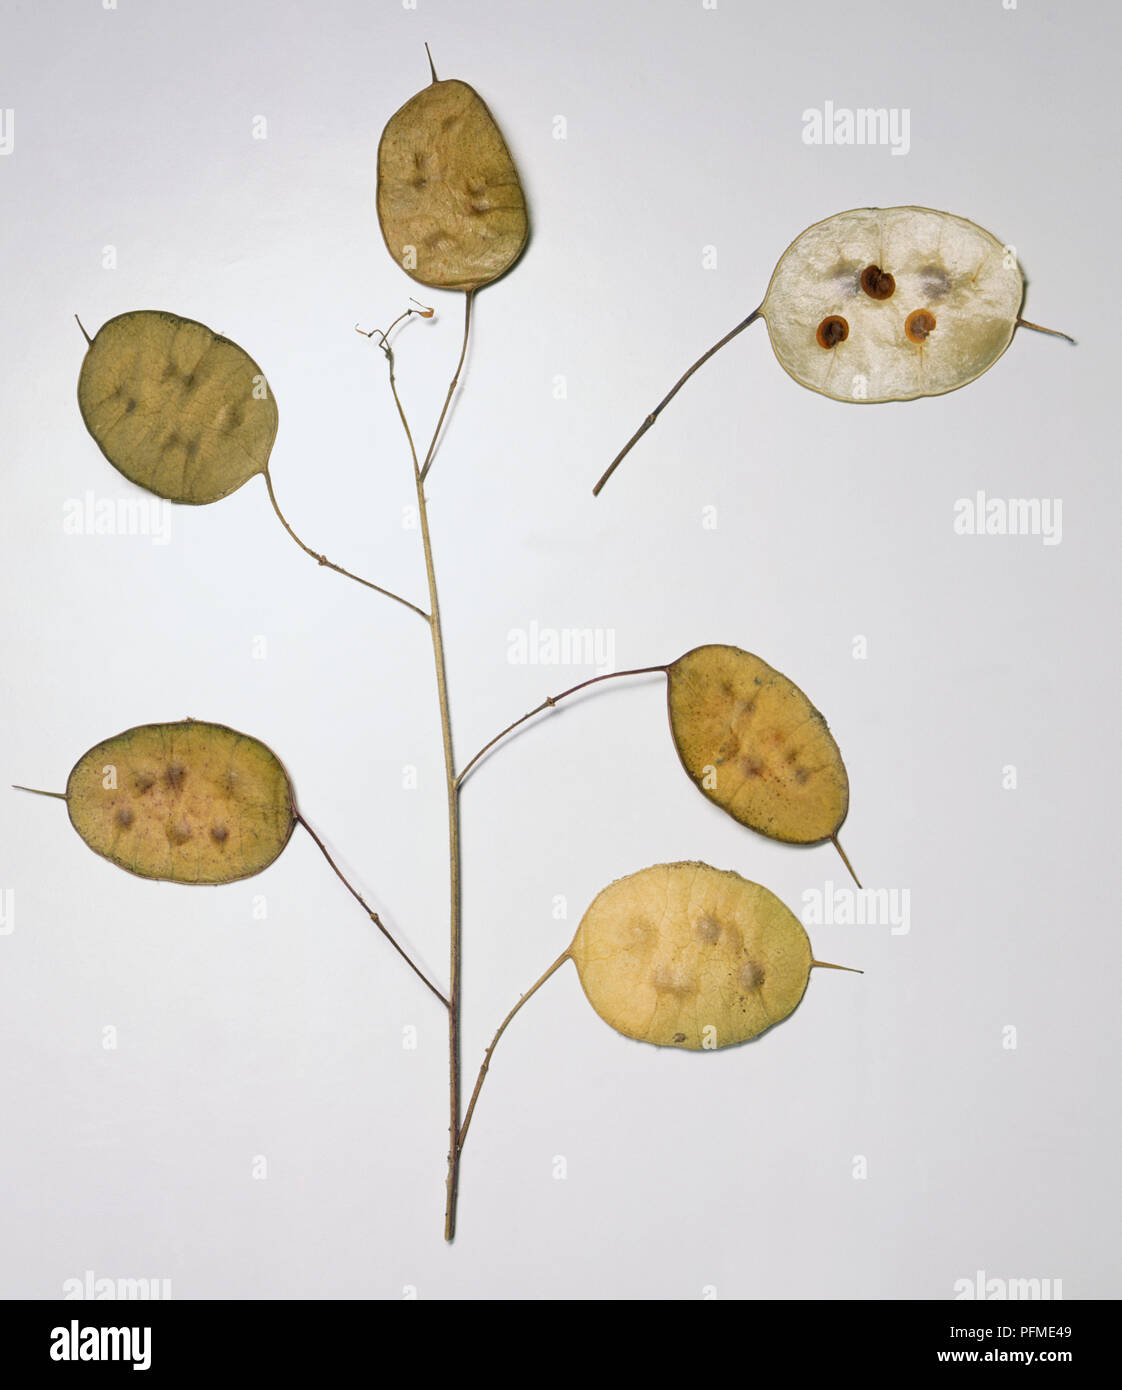 Lunaria annua, silicas of honesty, brown dried translucent flat oval seed pods. Stock Photo